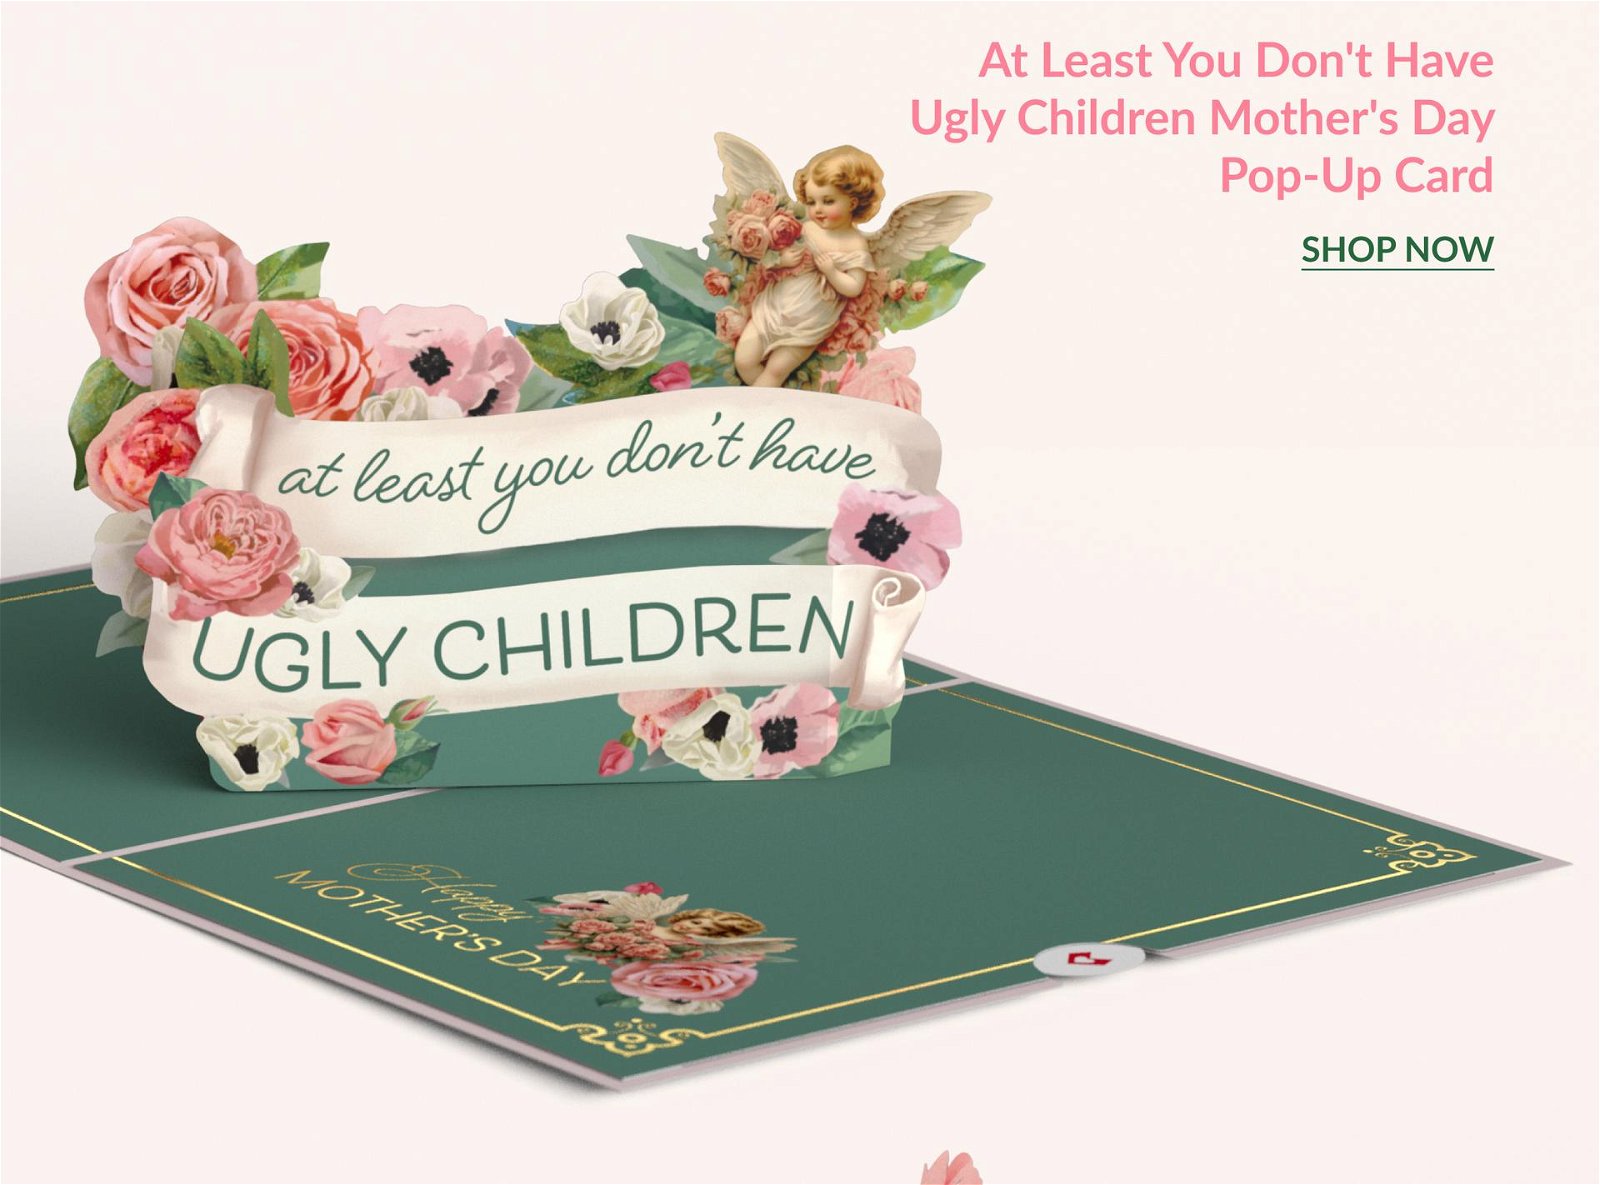 At least You Don’t Have Ugly Children Mother’s Day Pop-Up Card | SHOP NOW